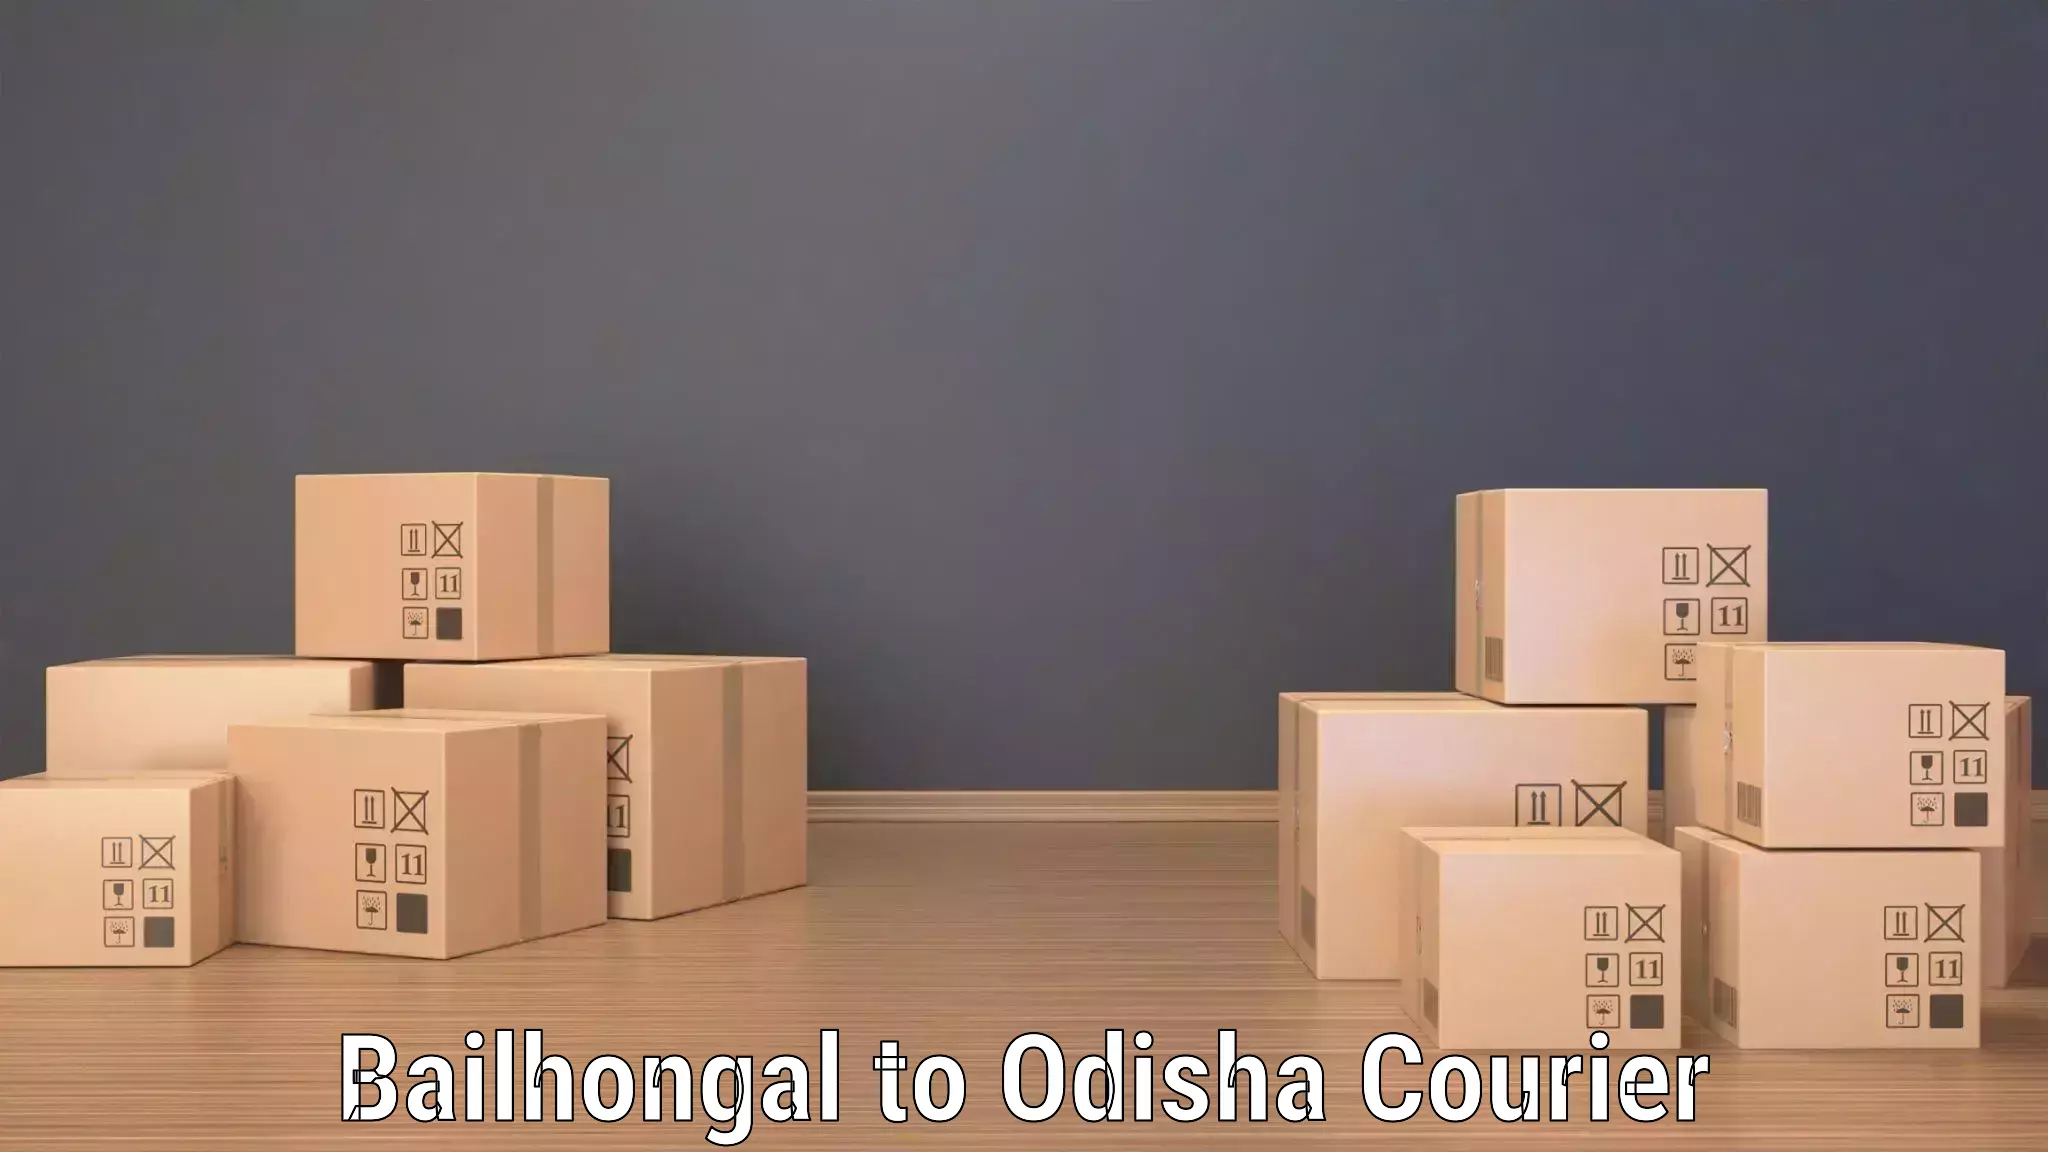 Courier service comparison Bailhongal to Kalinga Institute of Industrial Technology Bhubaneswar